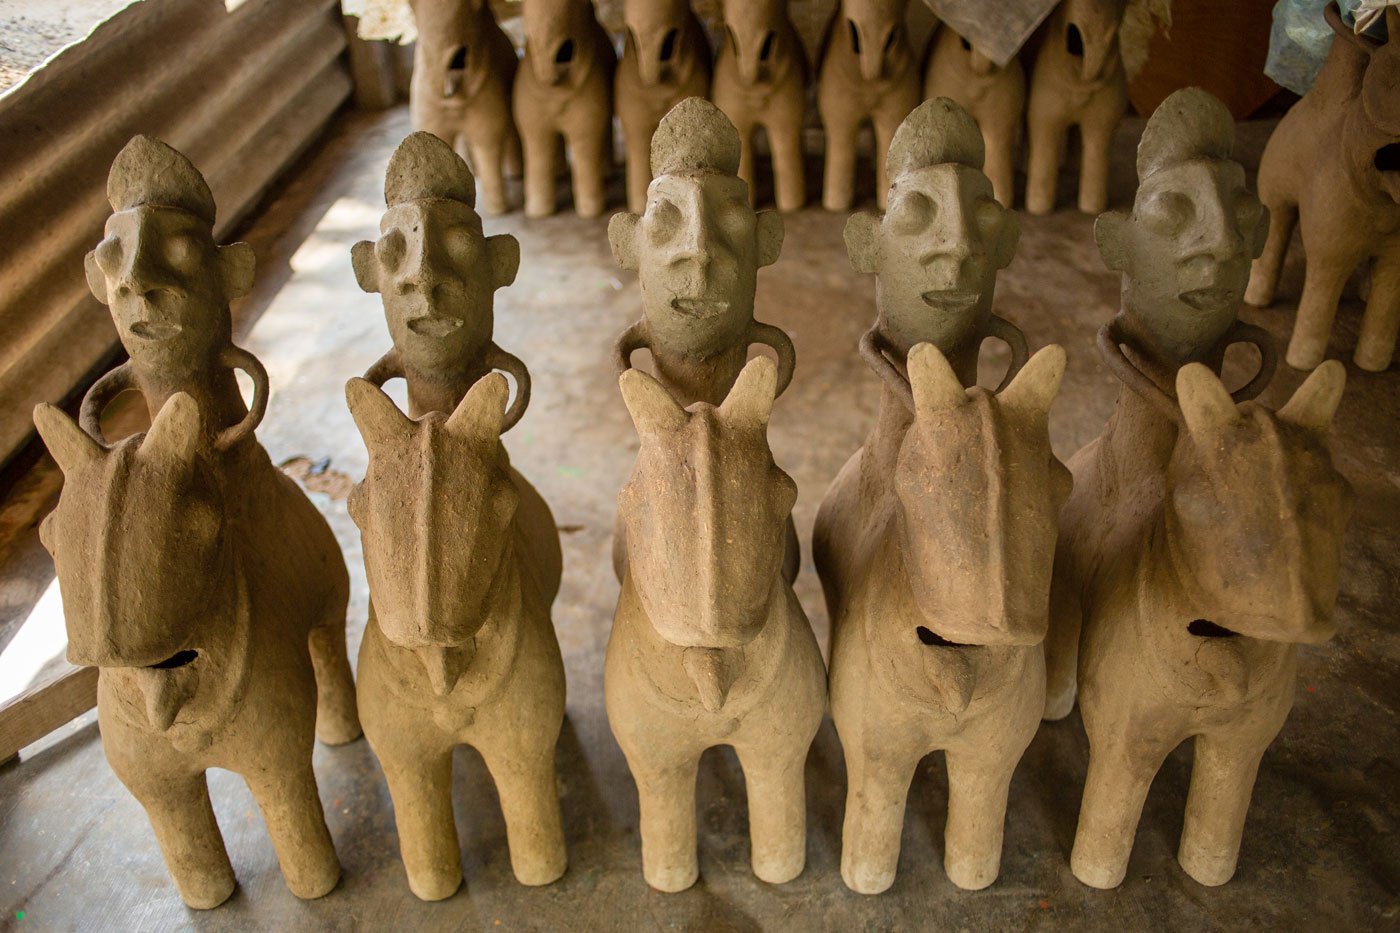 The idols have dried and are ready to be painted.